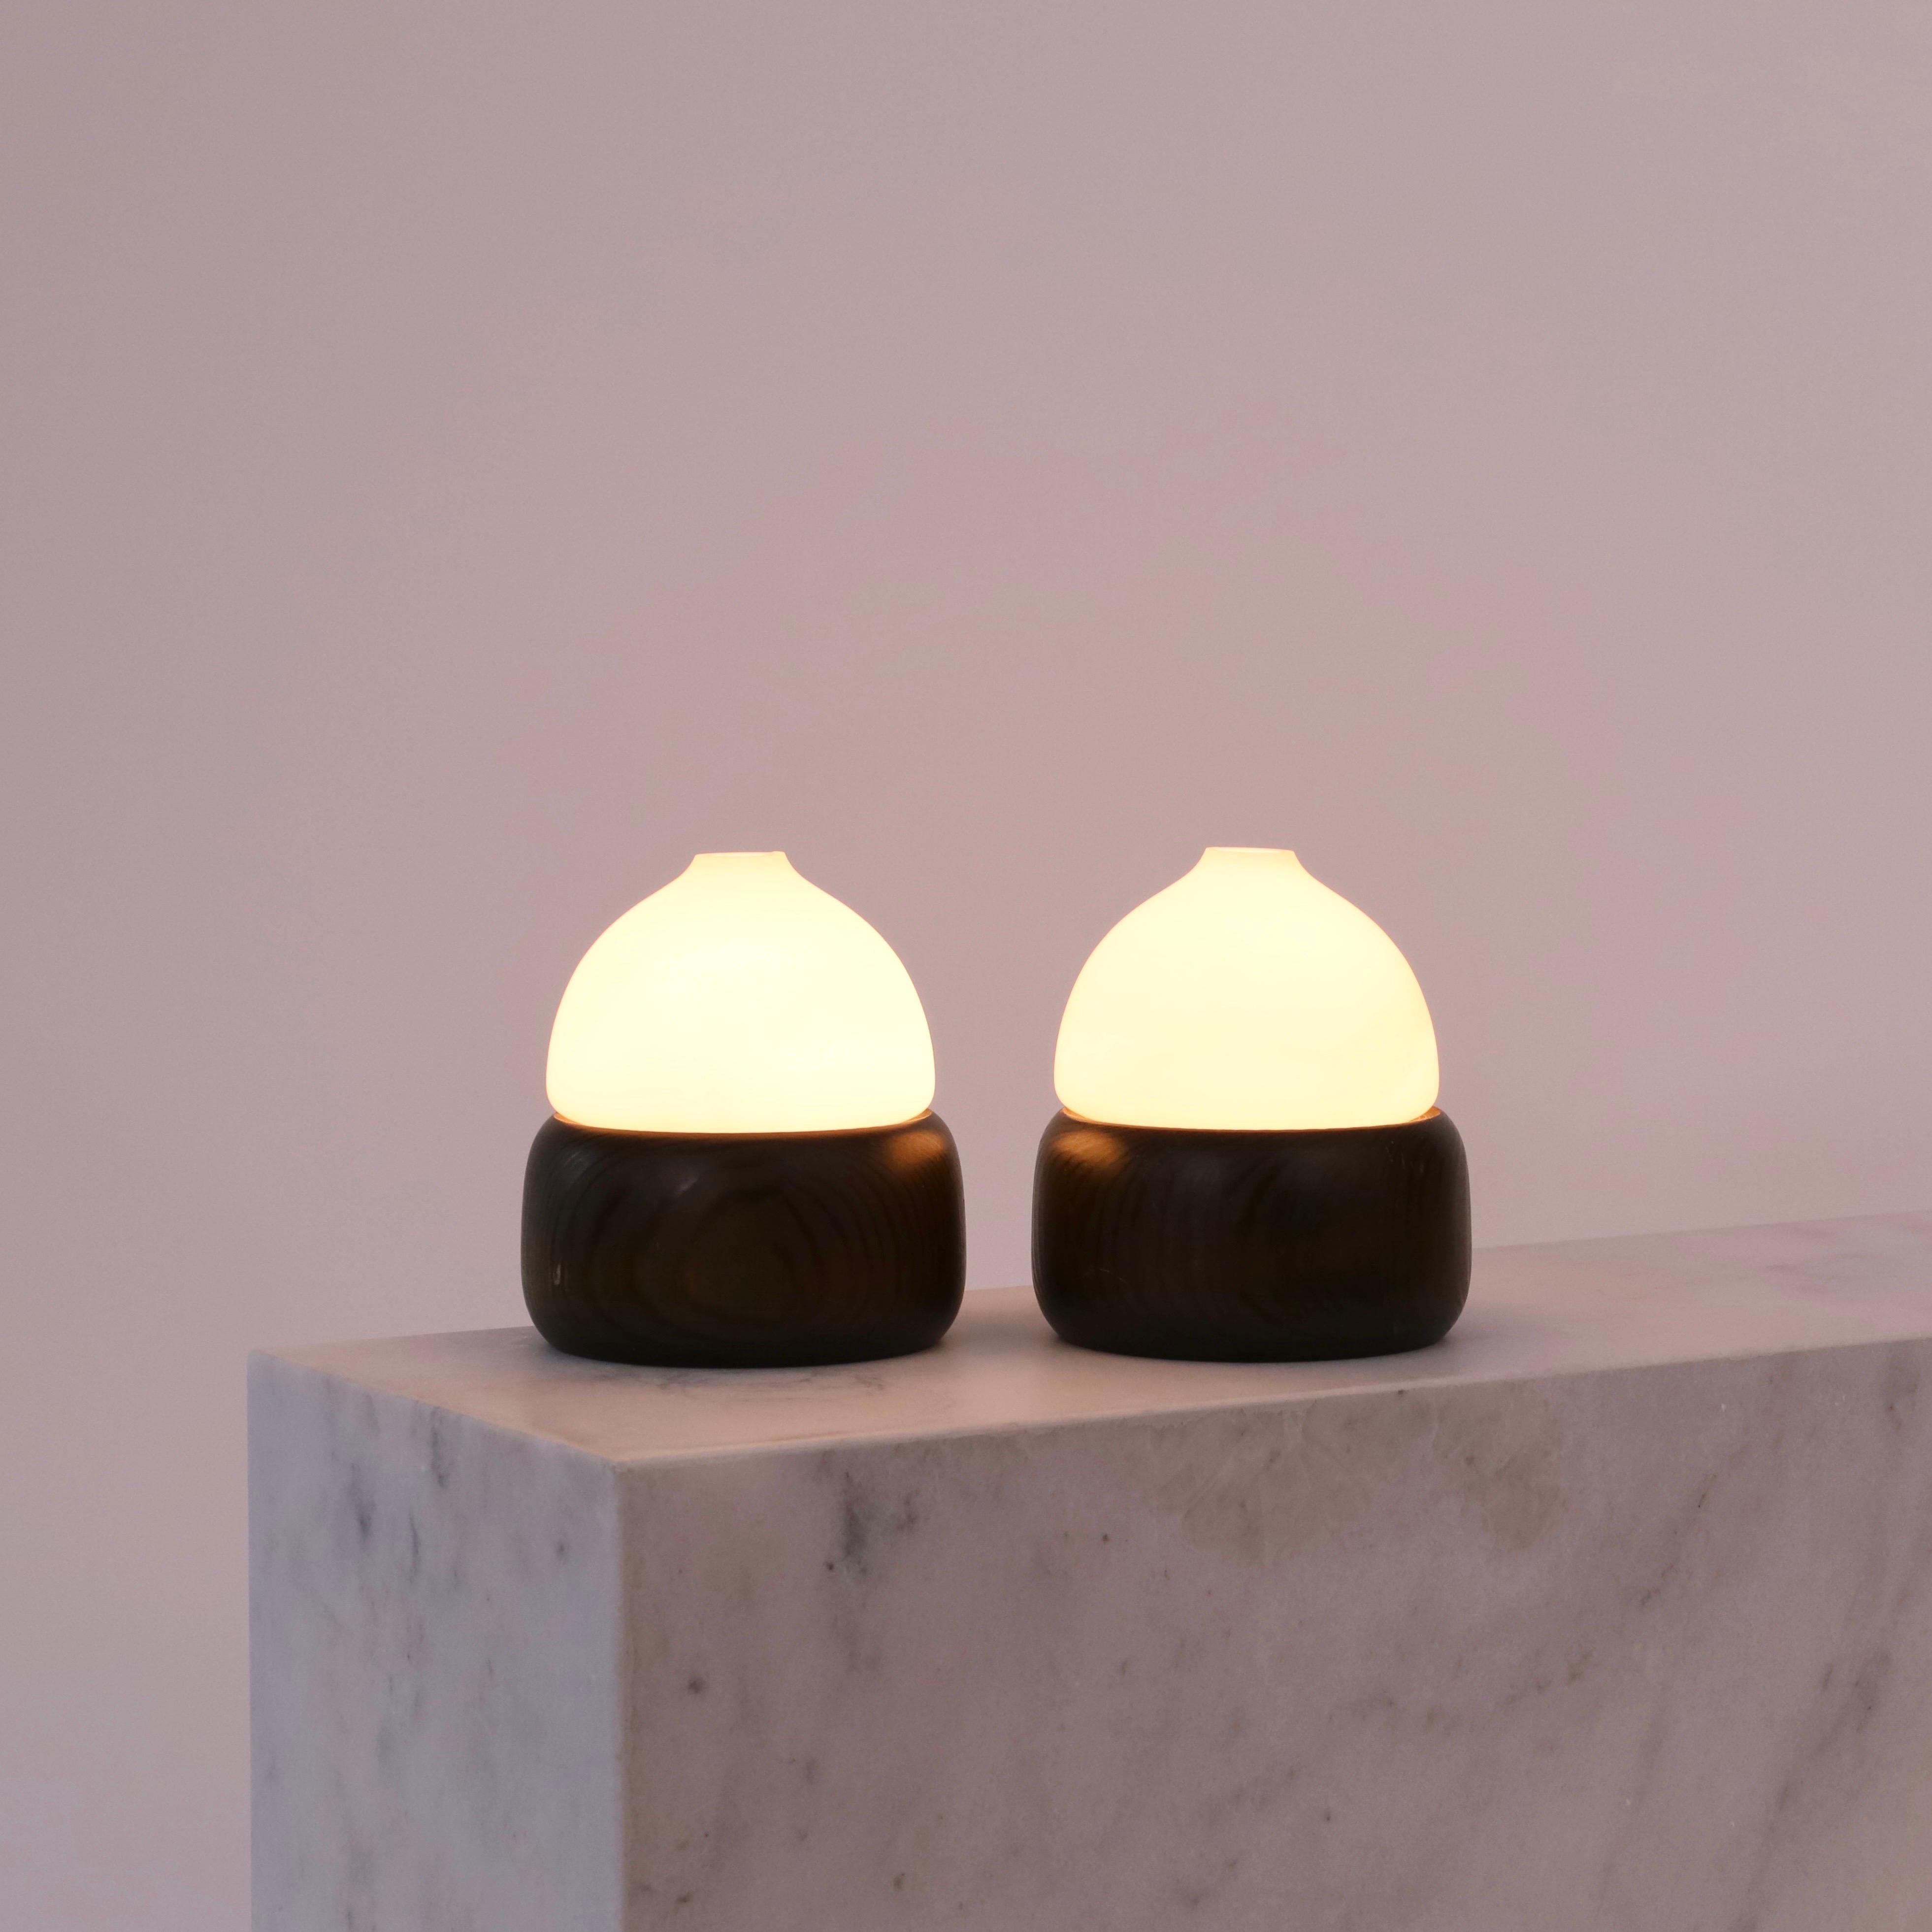 Set of Swedish Pine Wood Night Lamps by Aneta, Sweden, 1970s For Sale 4